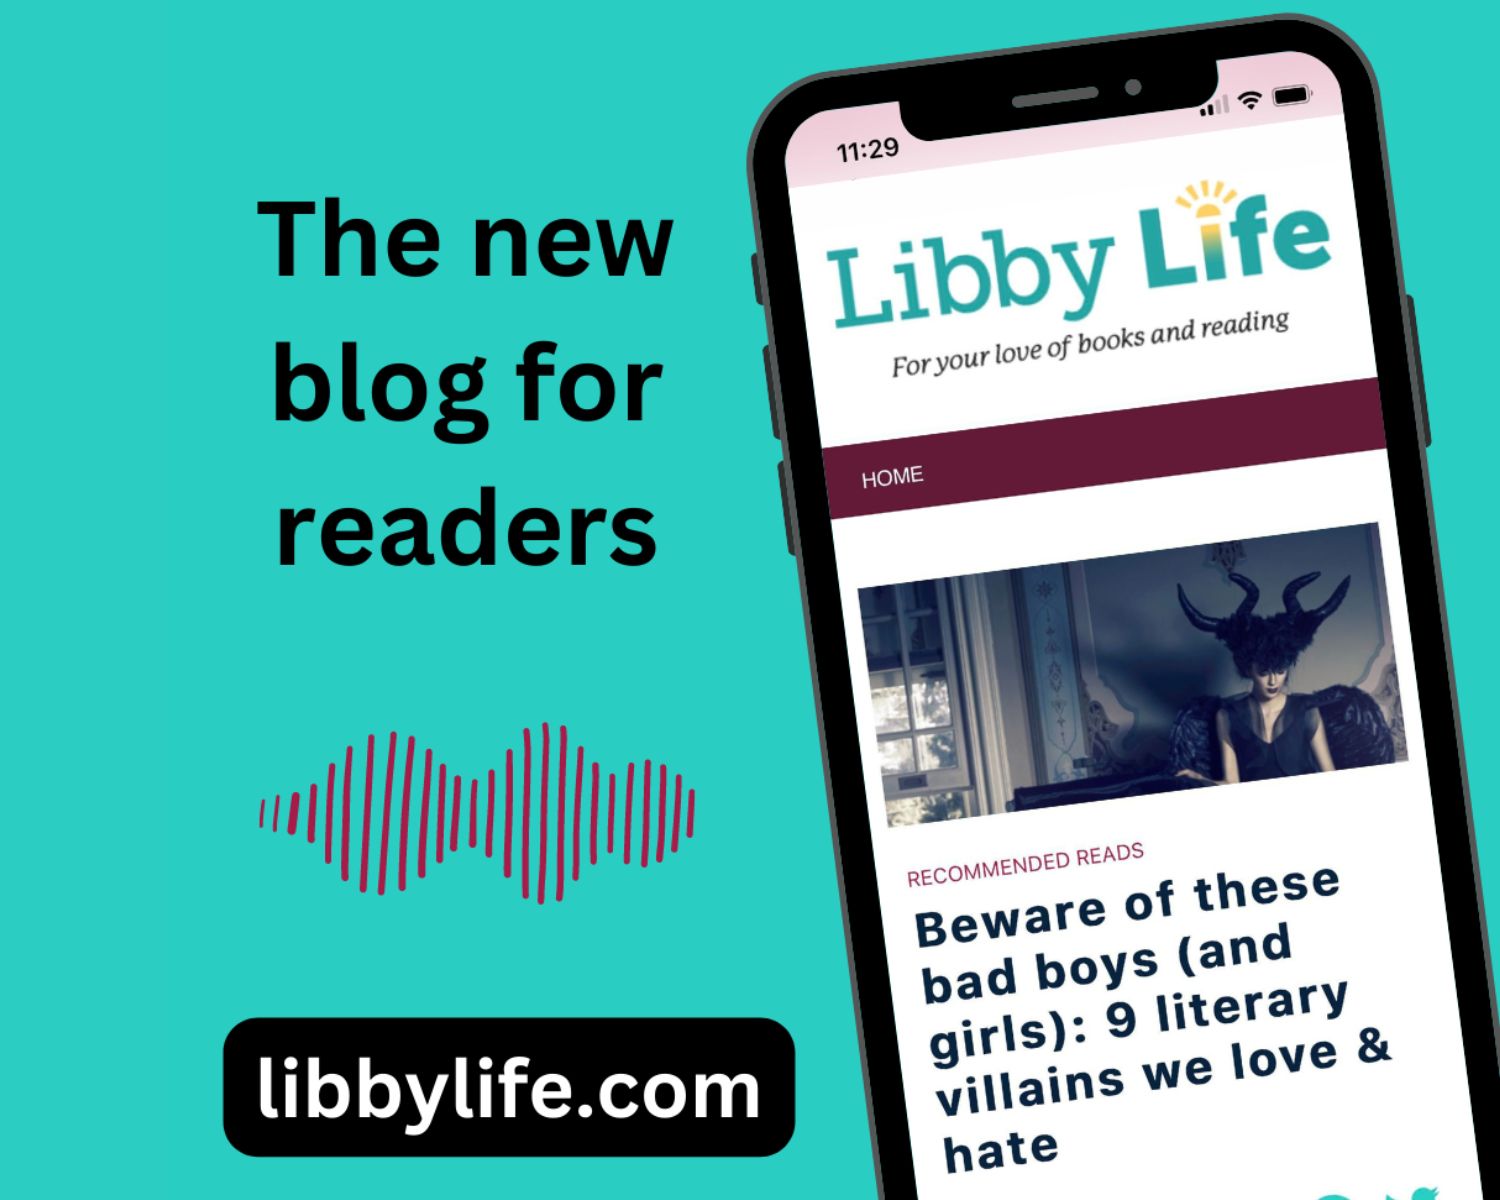 "The new blog for readers" - graphic has an iPhone with the Libby Life blog site on it and has a teal background